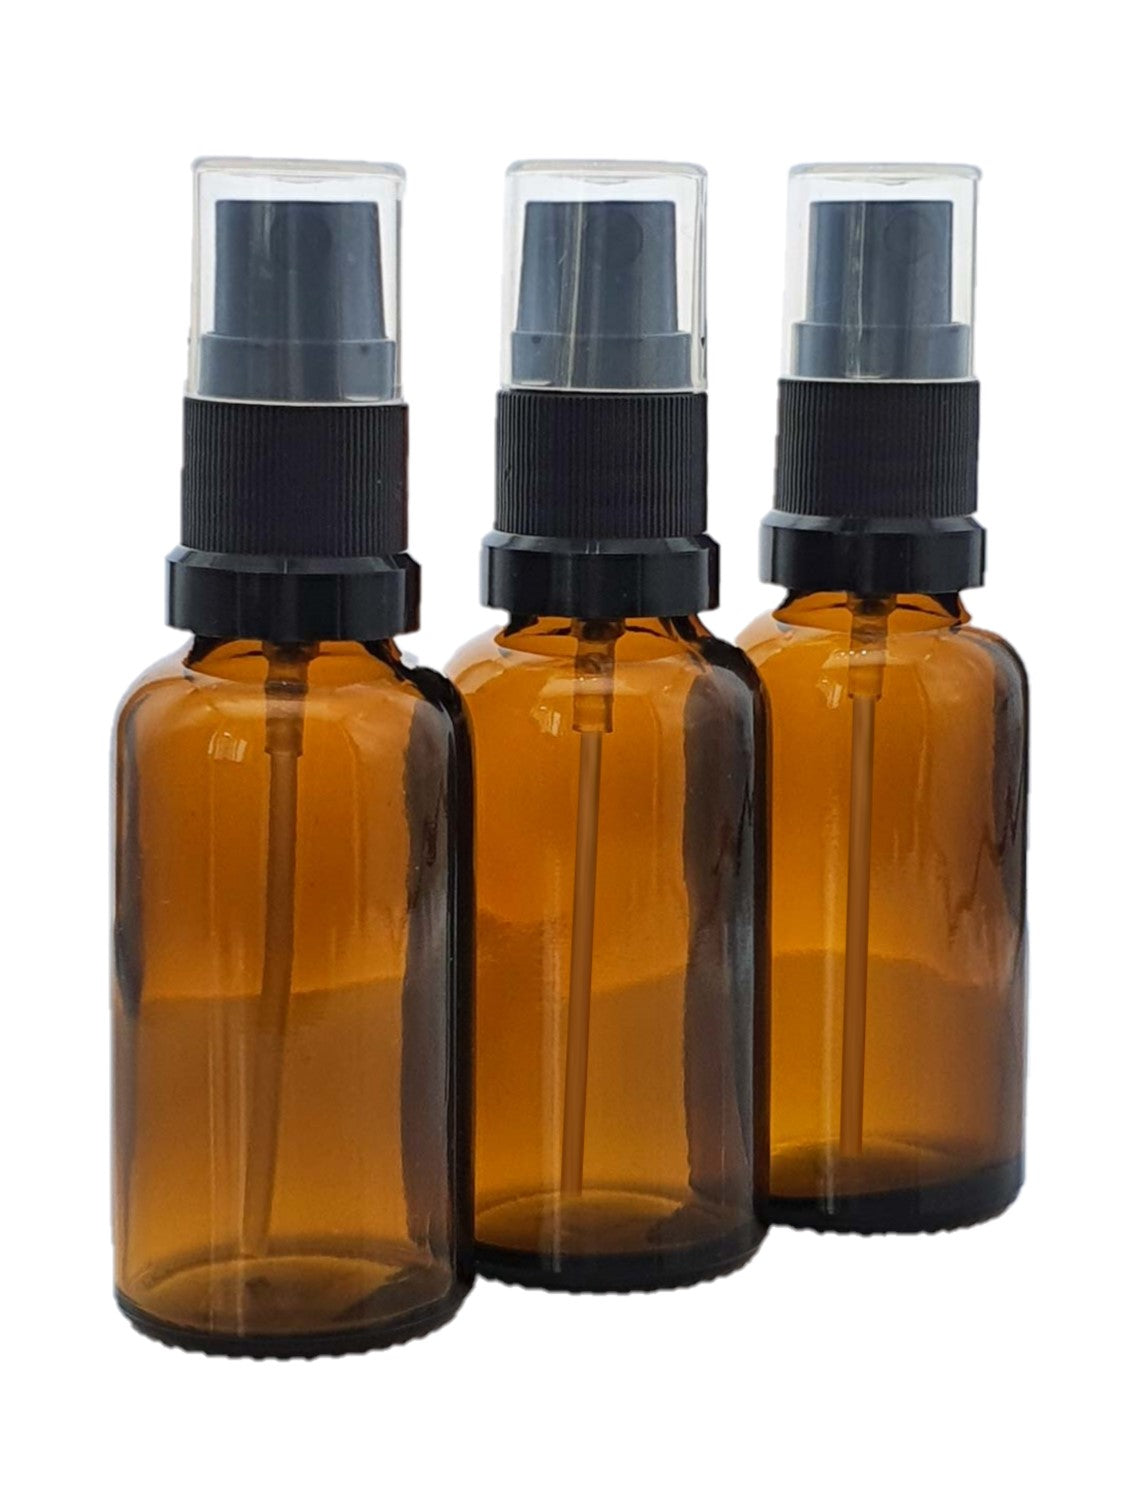 30ml Amber Glass Bottles with Black Atomiser Spray and Clear Overcap